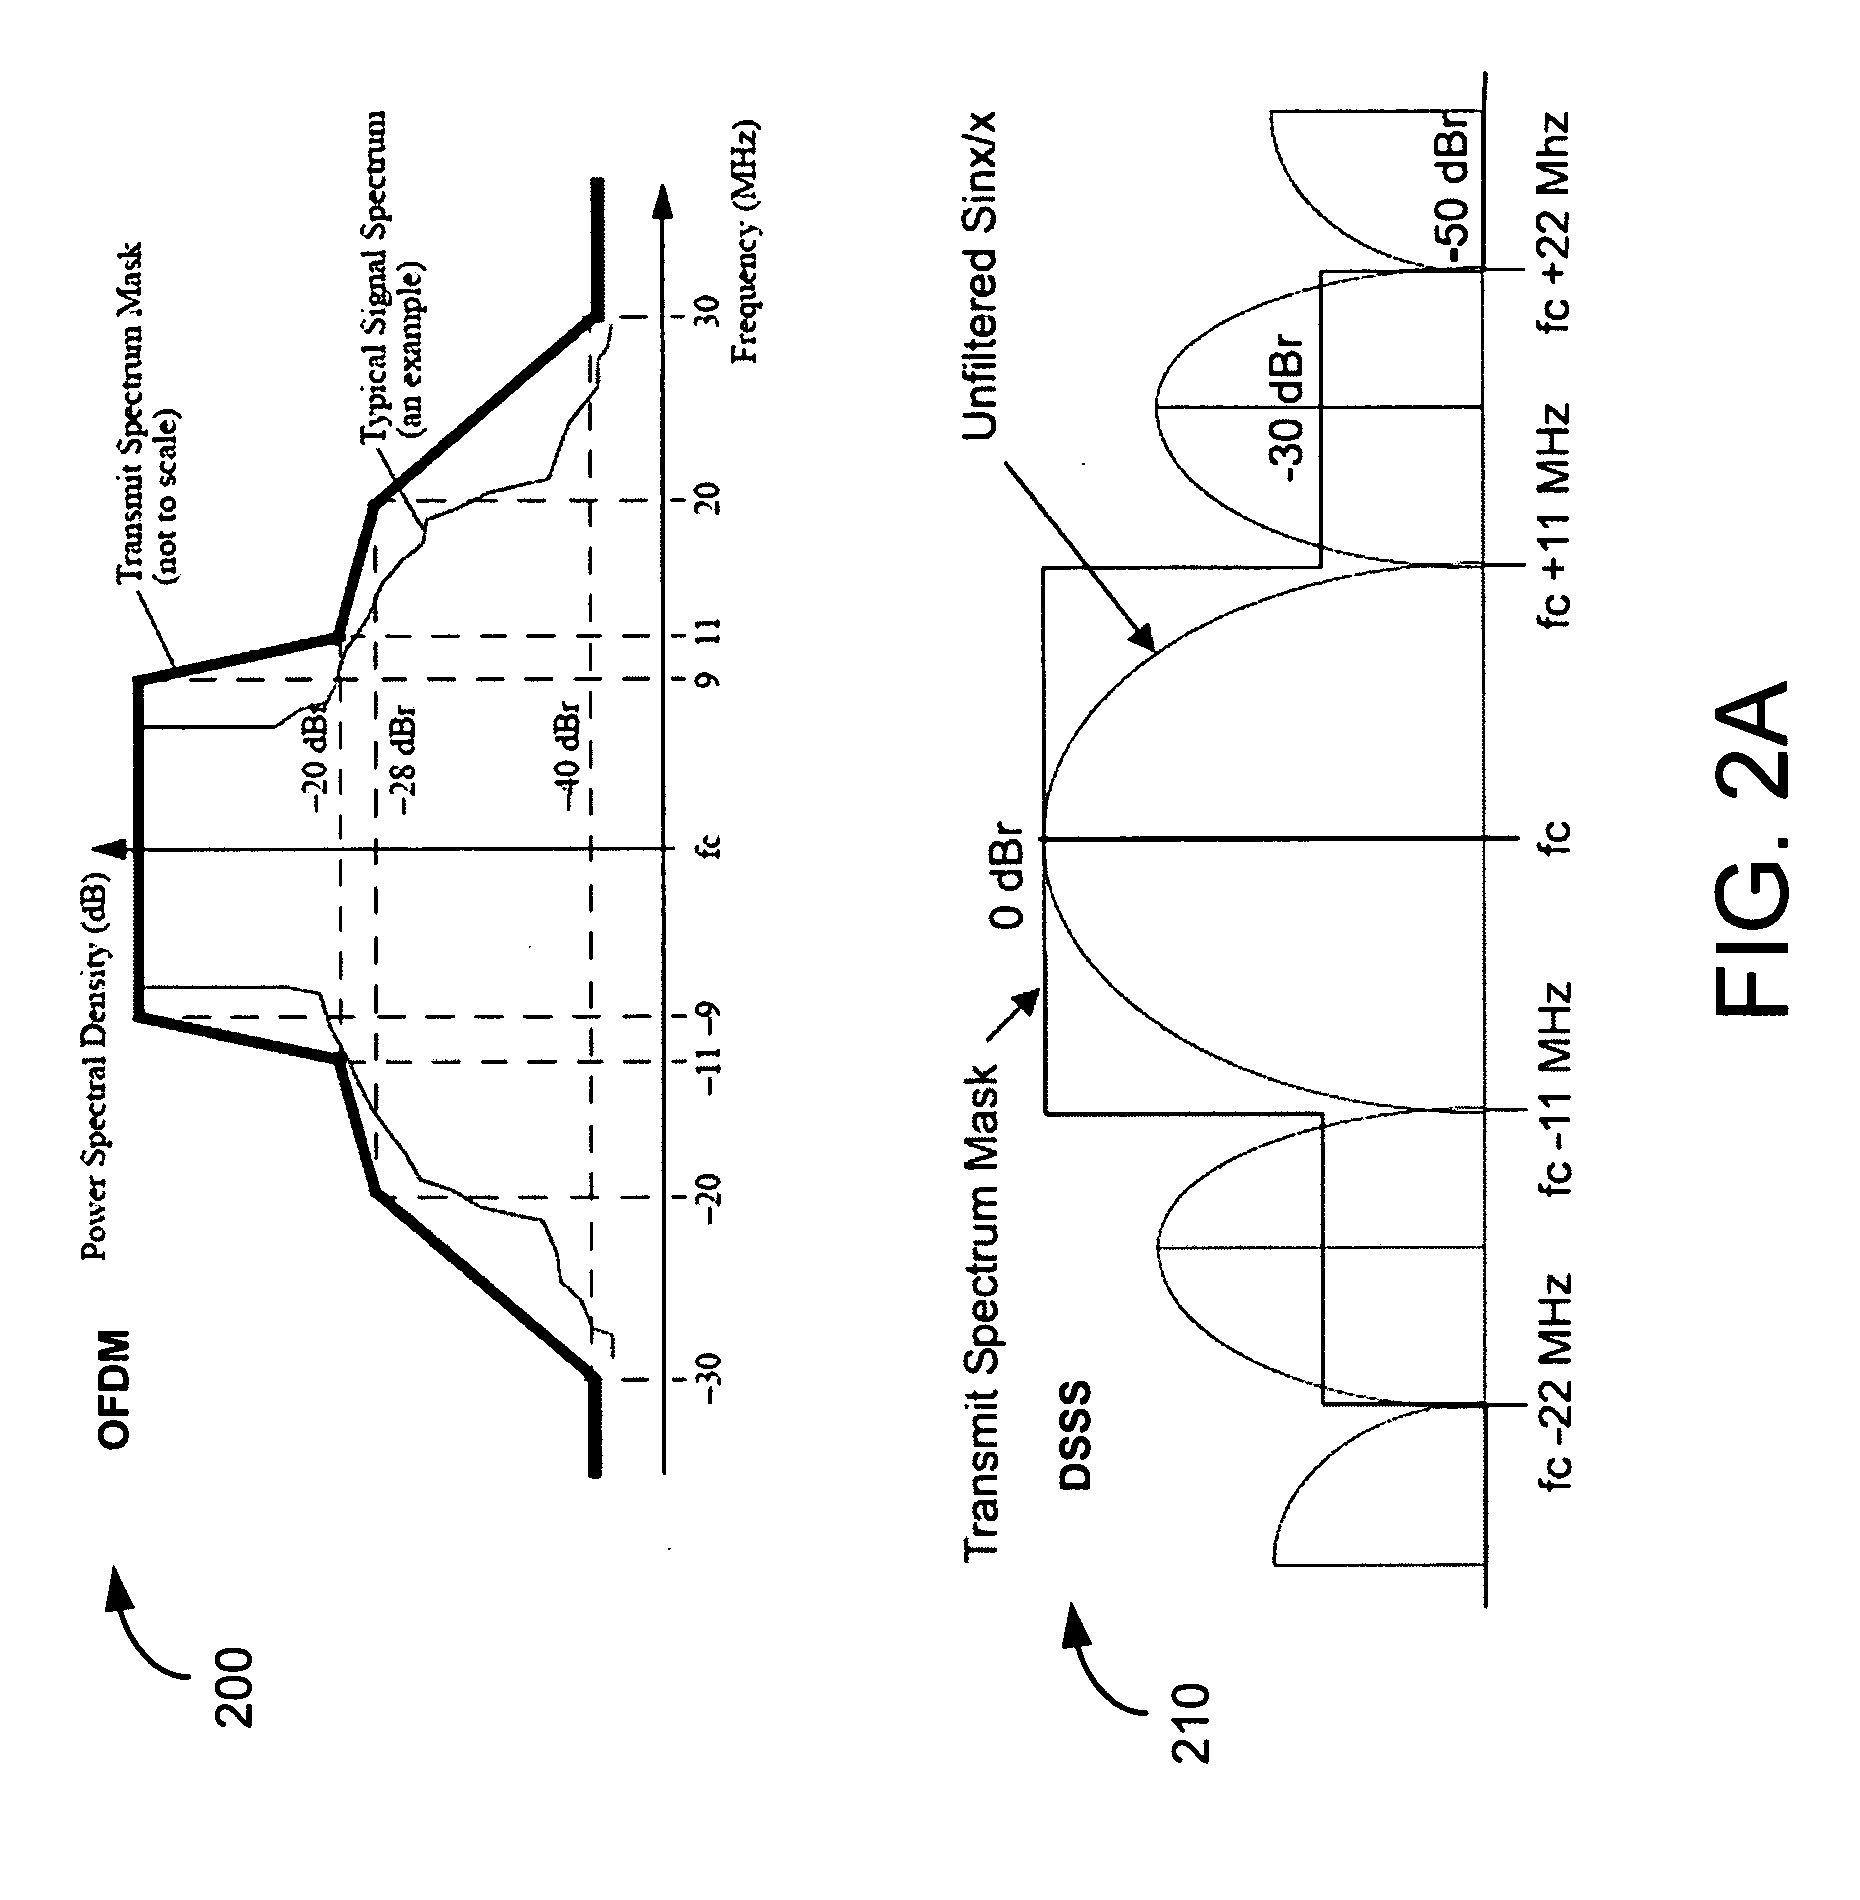 Systems and methods for wireless intrusion detection using spectral analysis